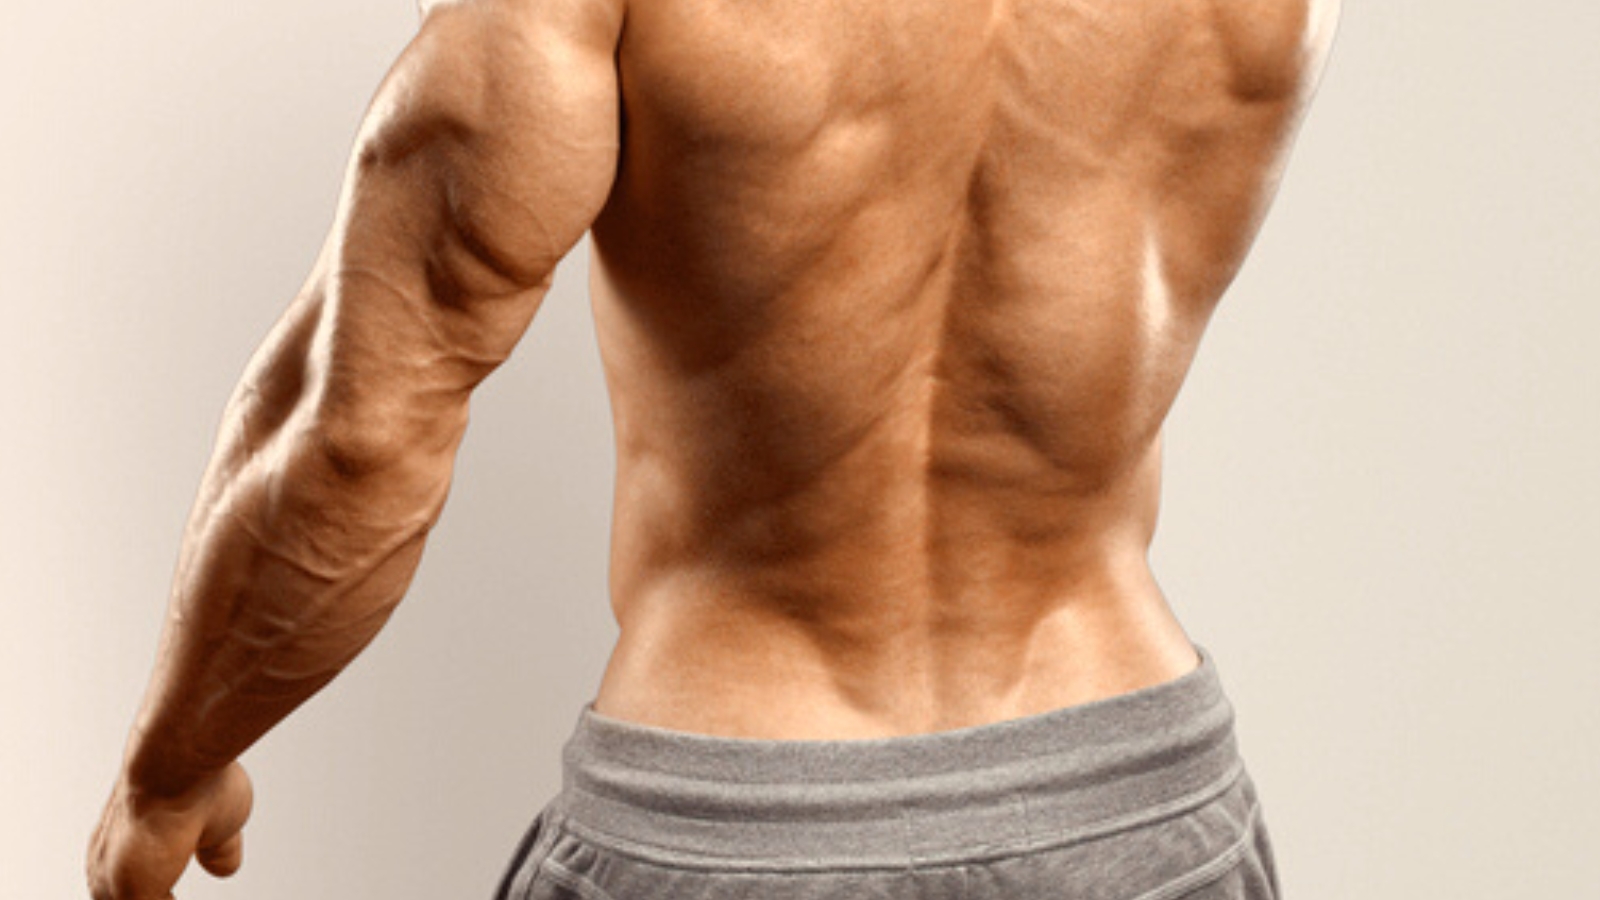 Get A Smaller Waist With Back Training - V Shred